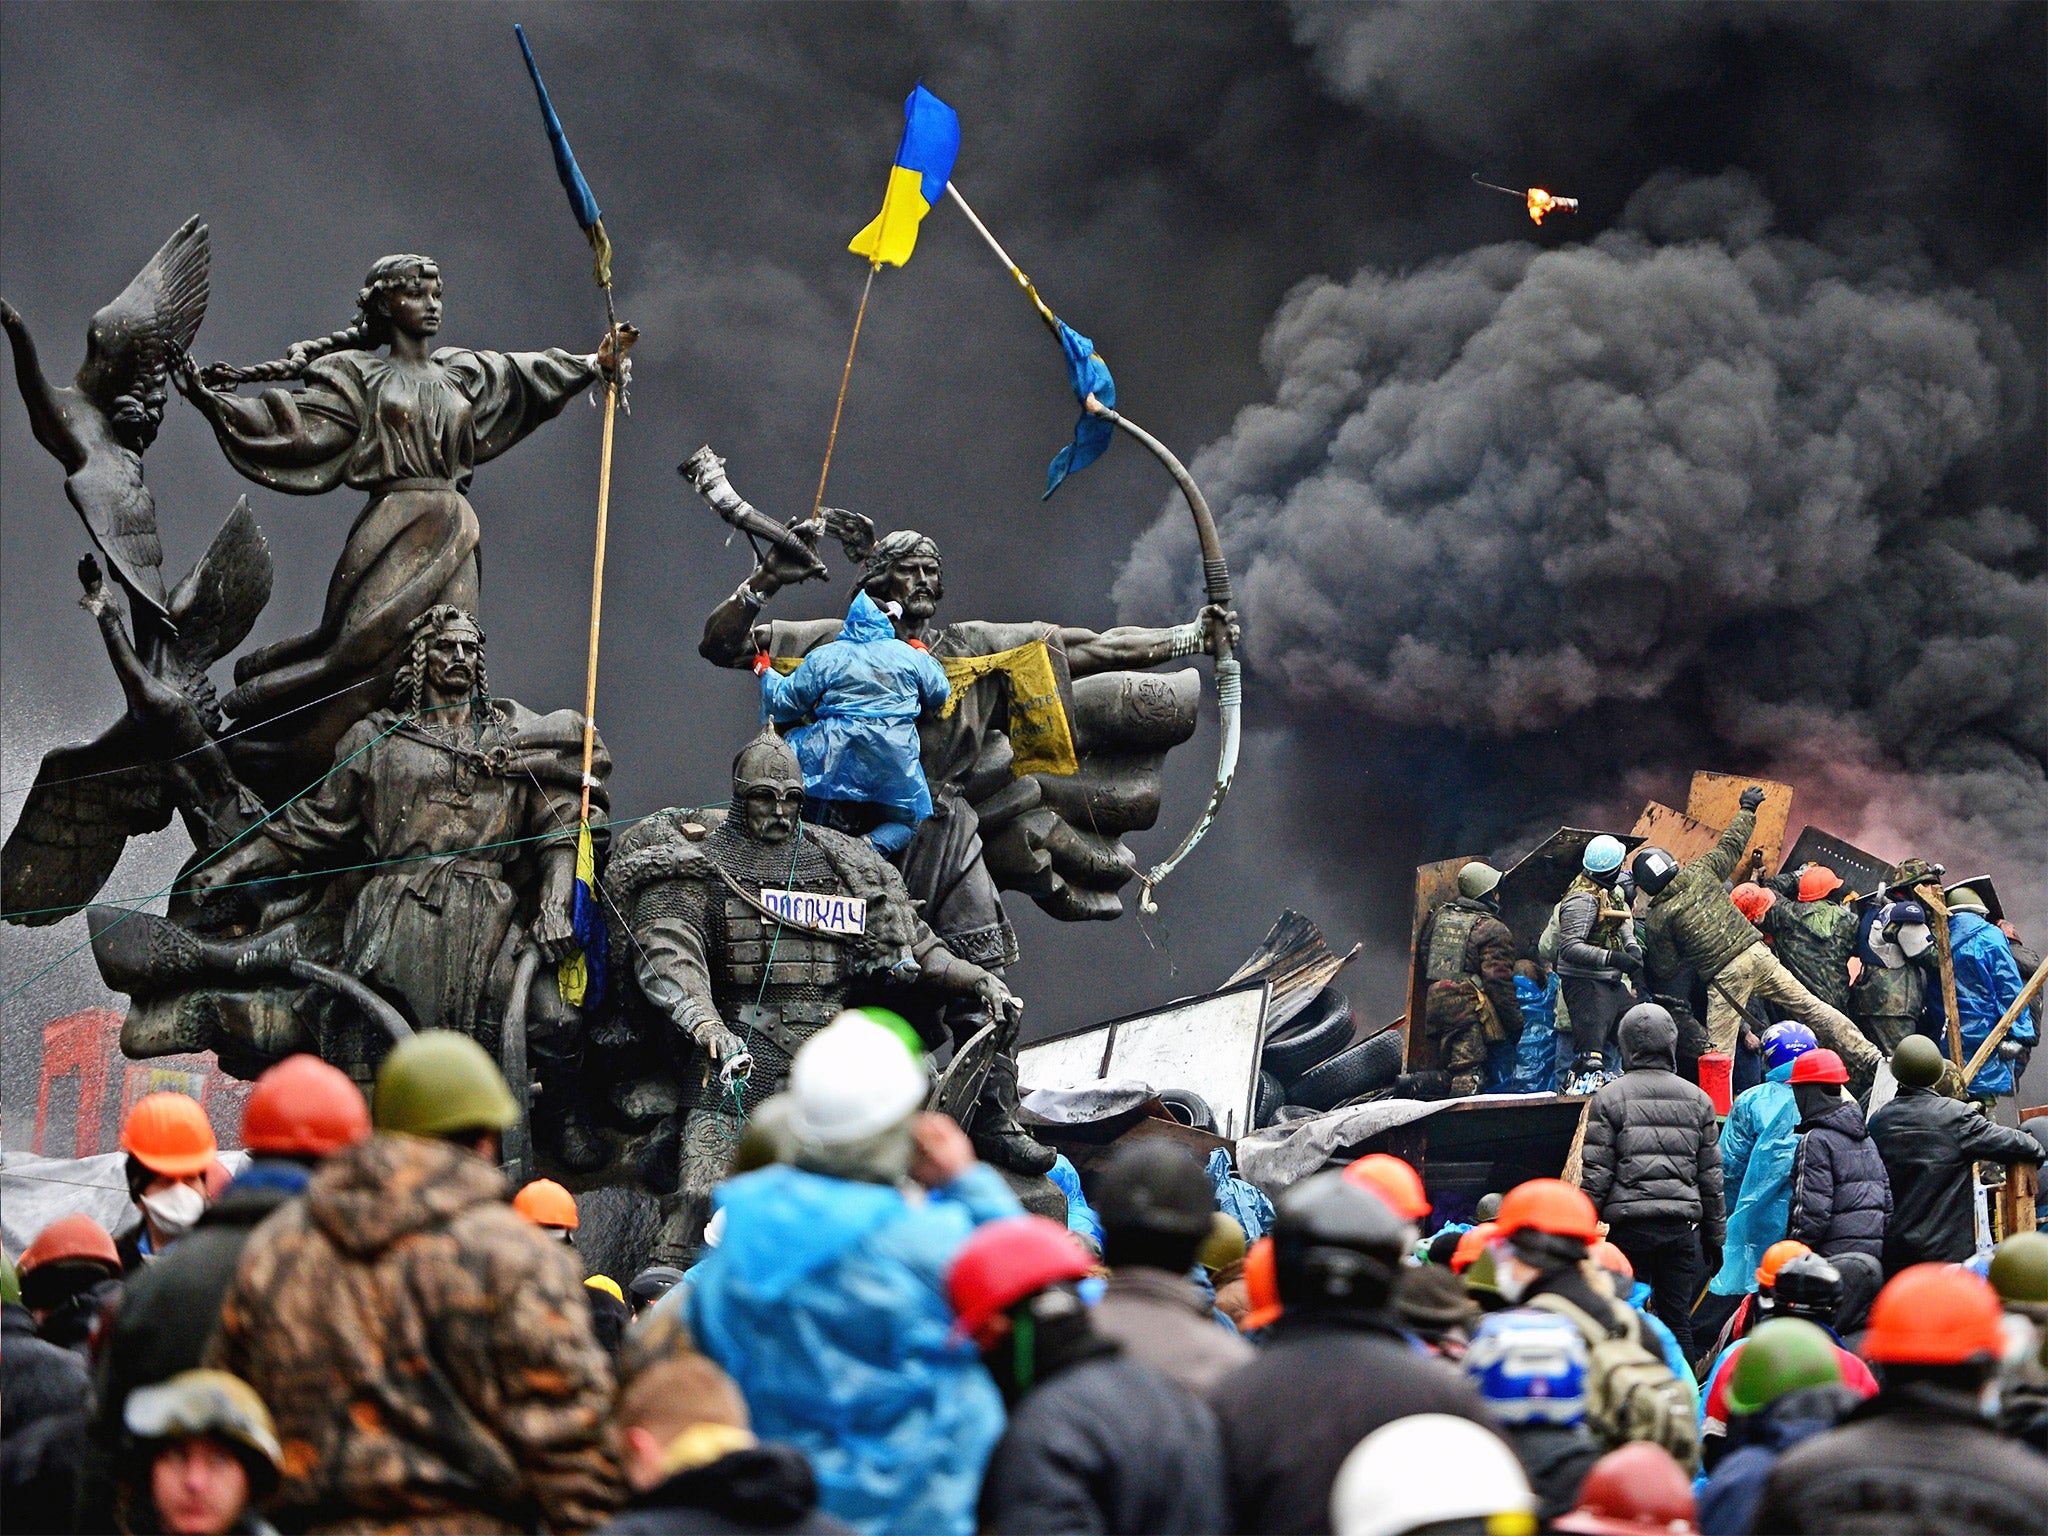 Protests in the Maidan in Kiev in February 2014 led to the ousting of President Yanukovych